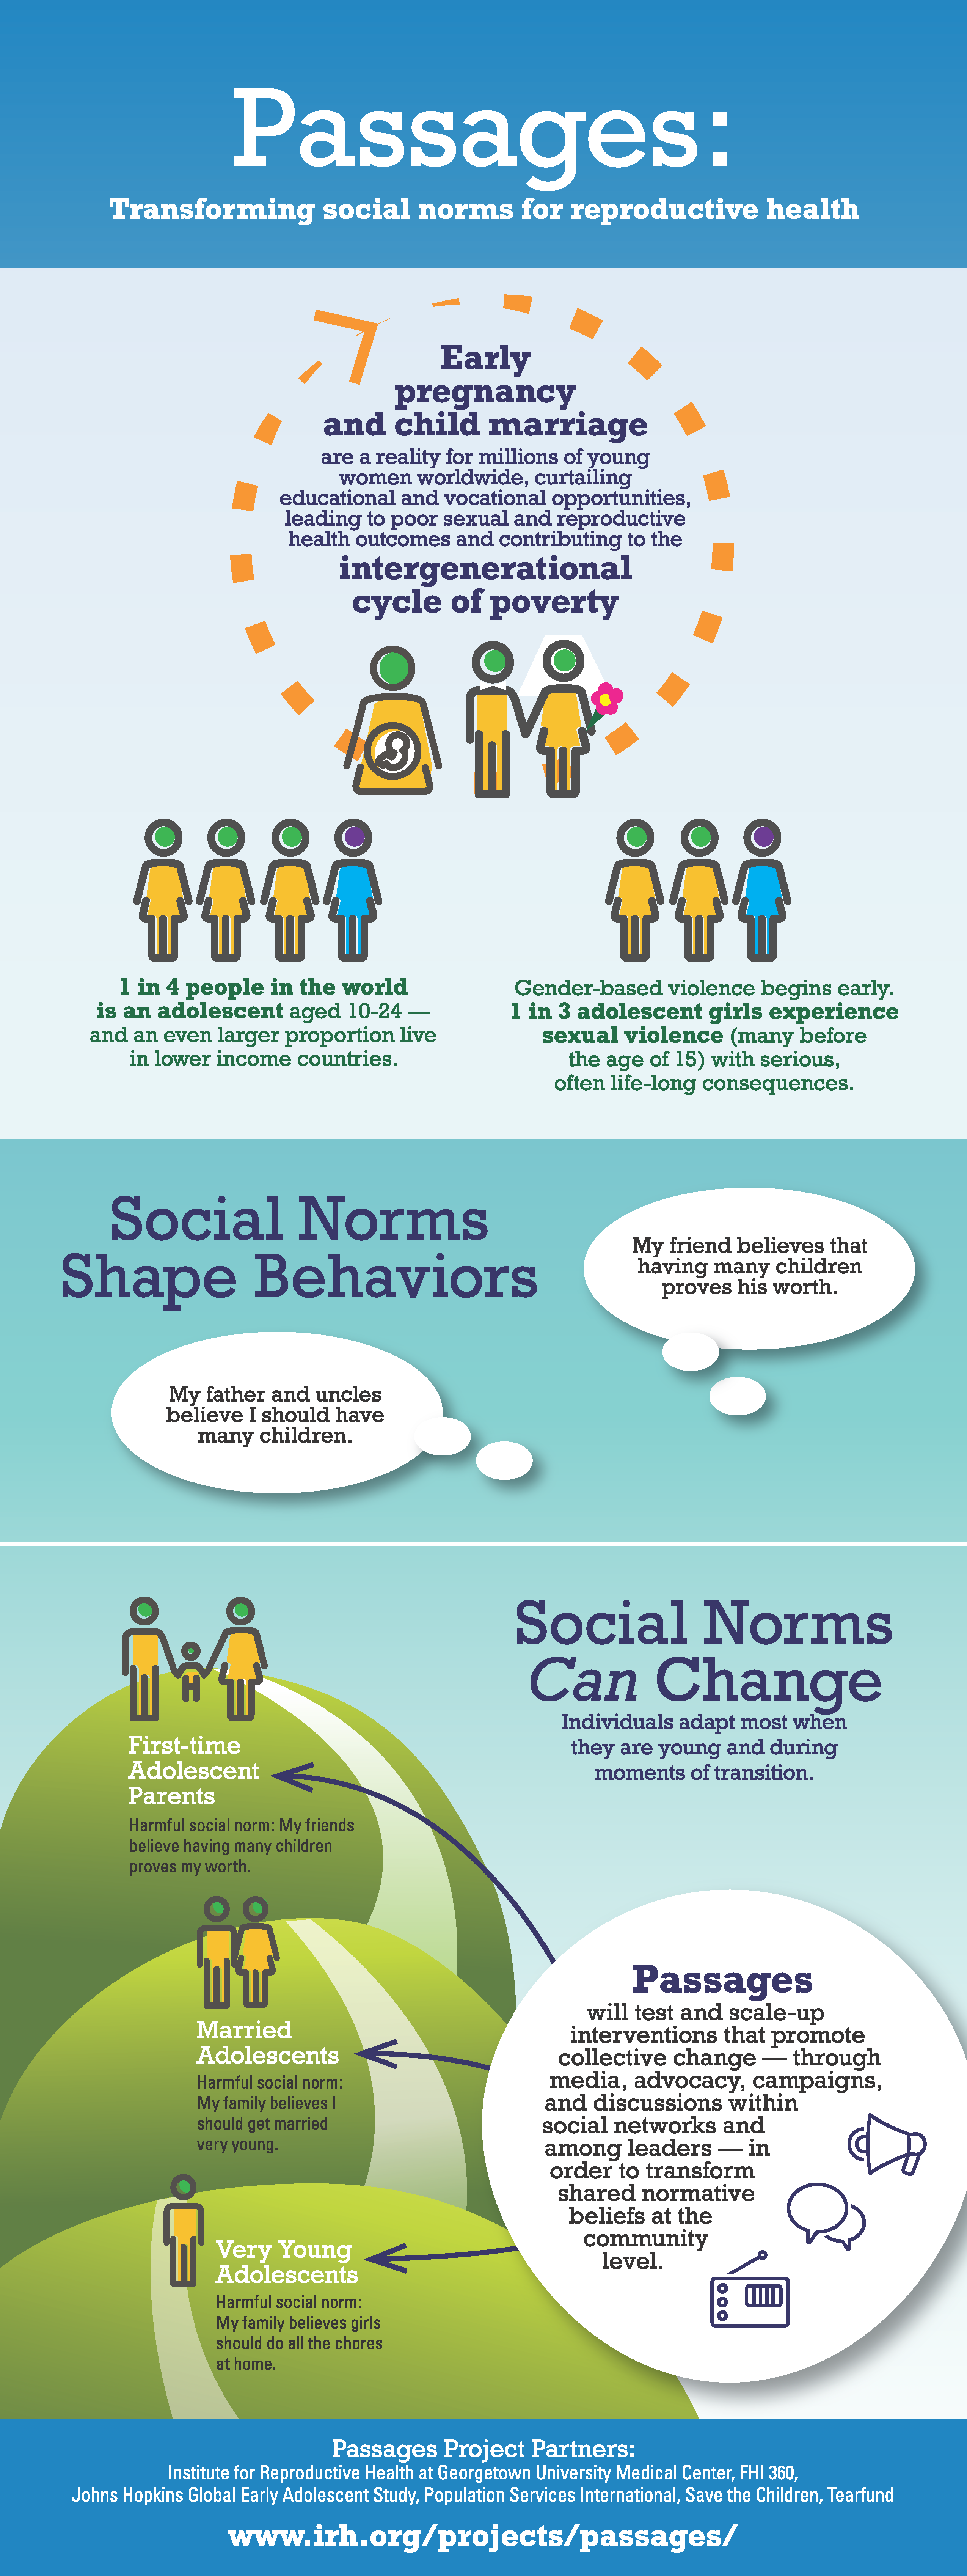 Passages_Social_Norms_Infographic